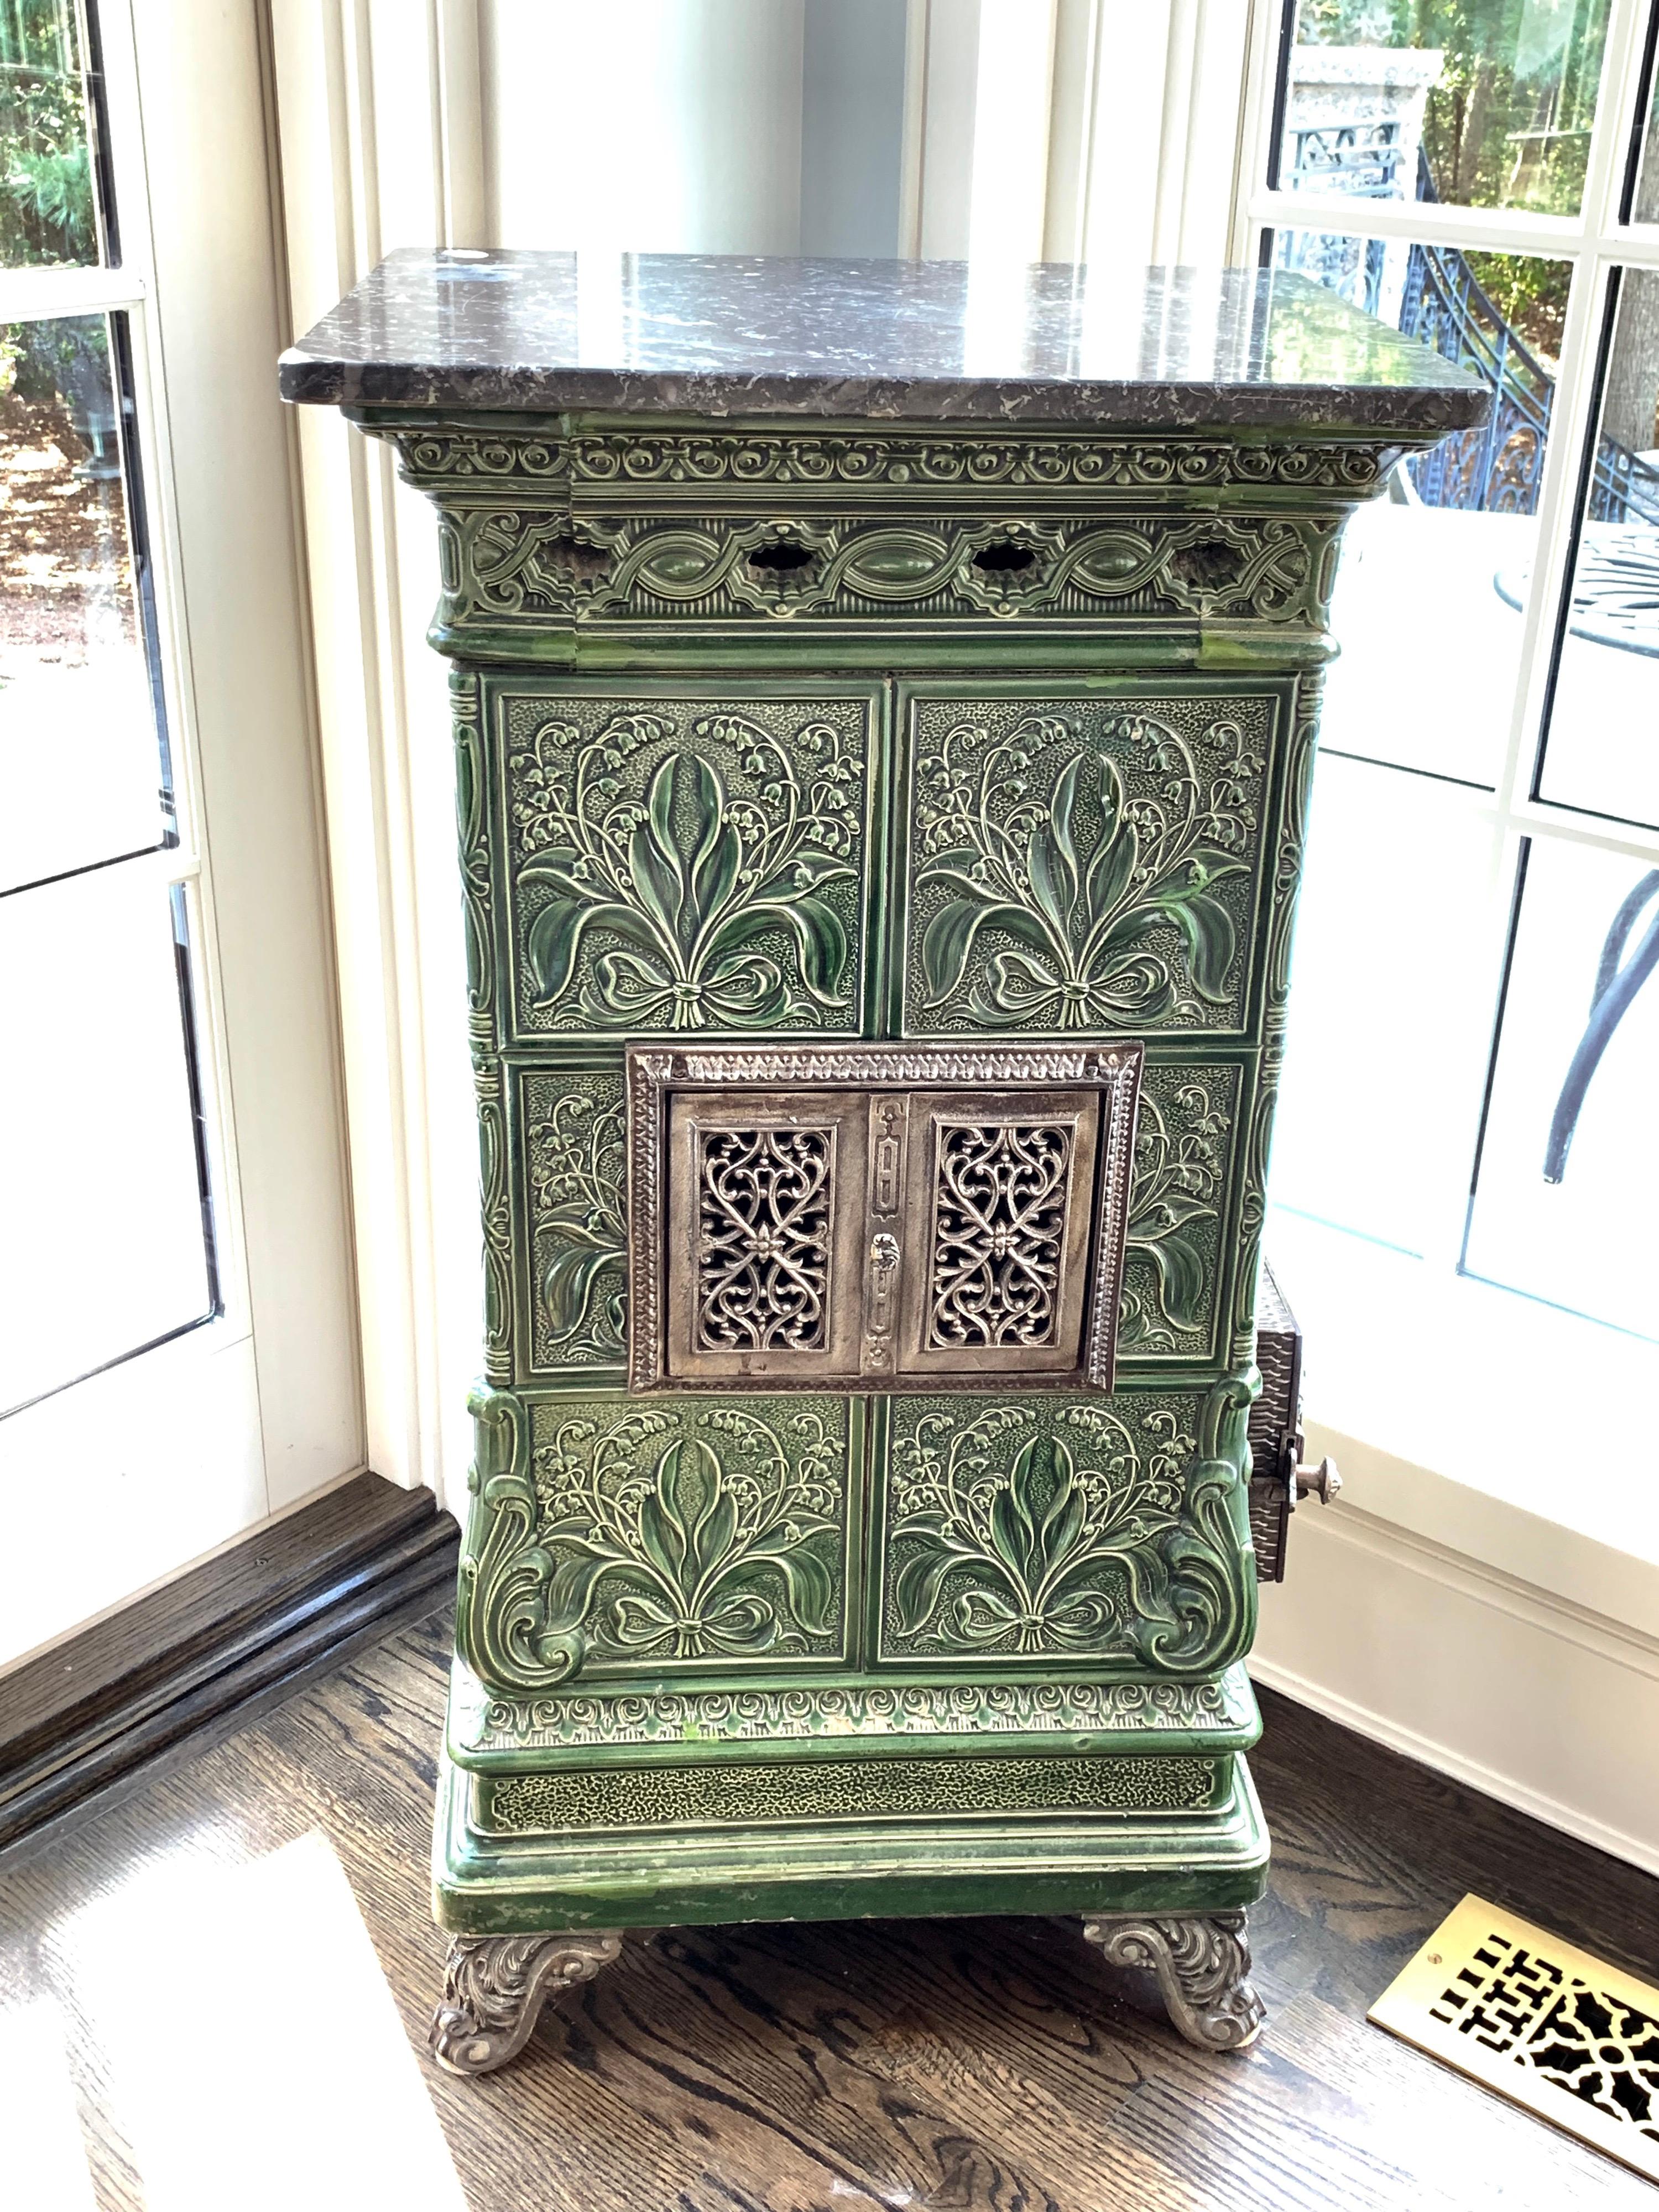 This beautiful French Majolica Tile Stove is from circa 1910-1920. The Tiles depict Lillies of The Valley in relief.